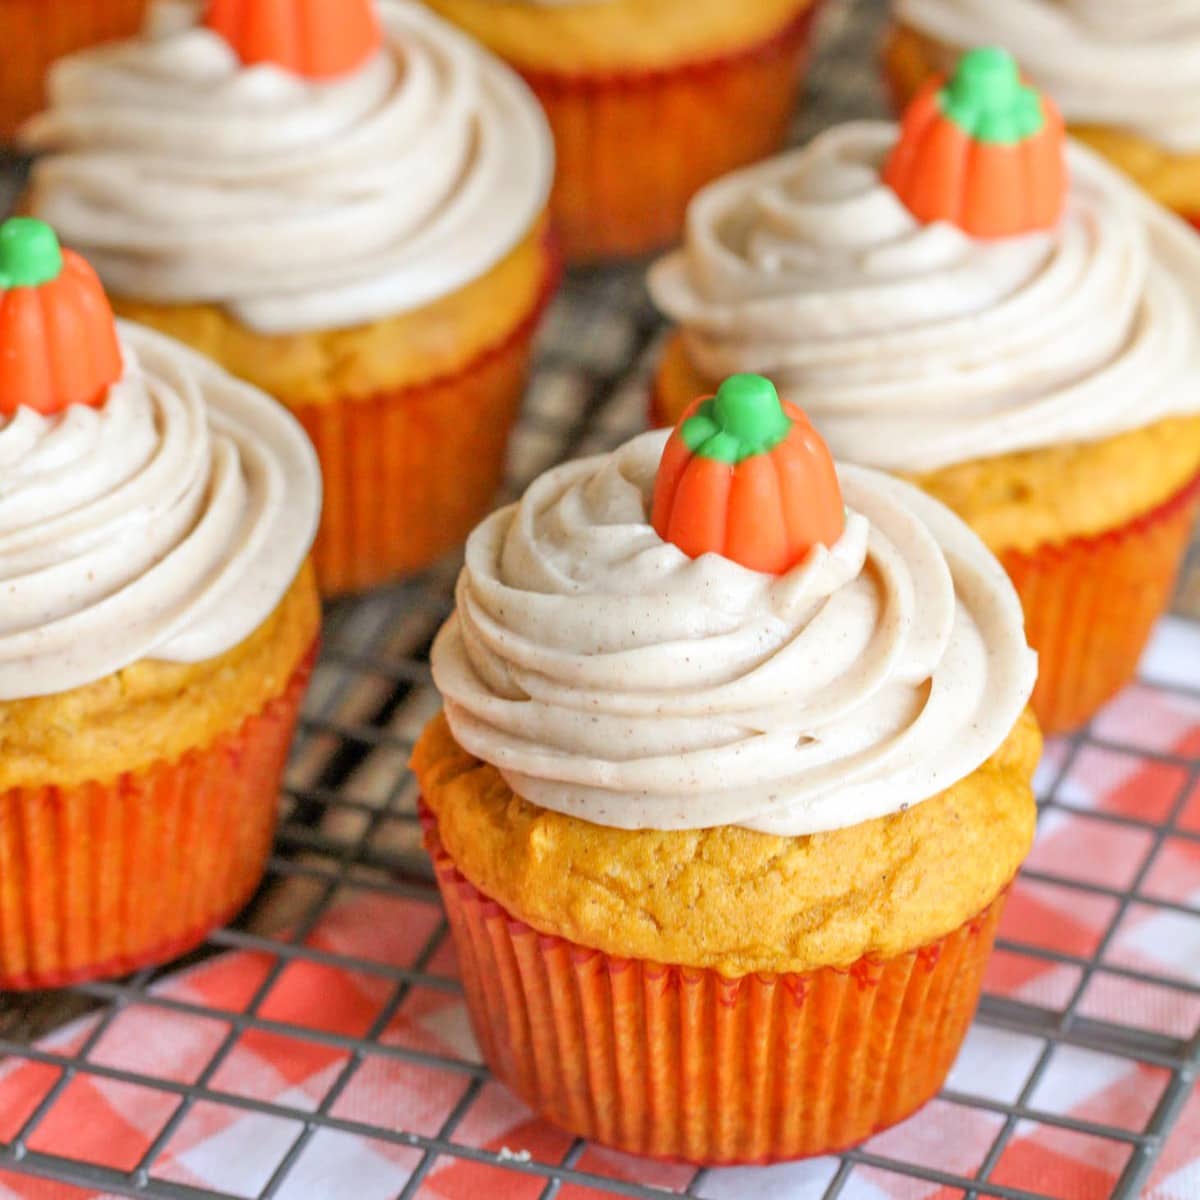 Halloween desserts - easy pumpkin cupcakes topped with cinnamon cream cheese frosting.